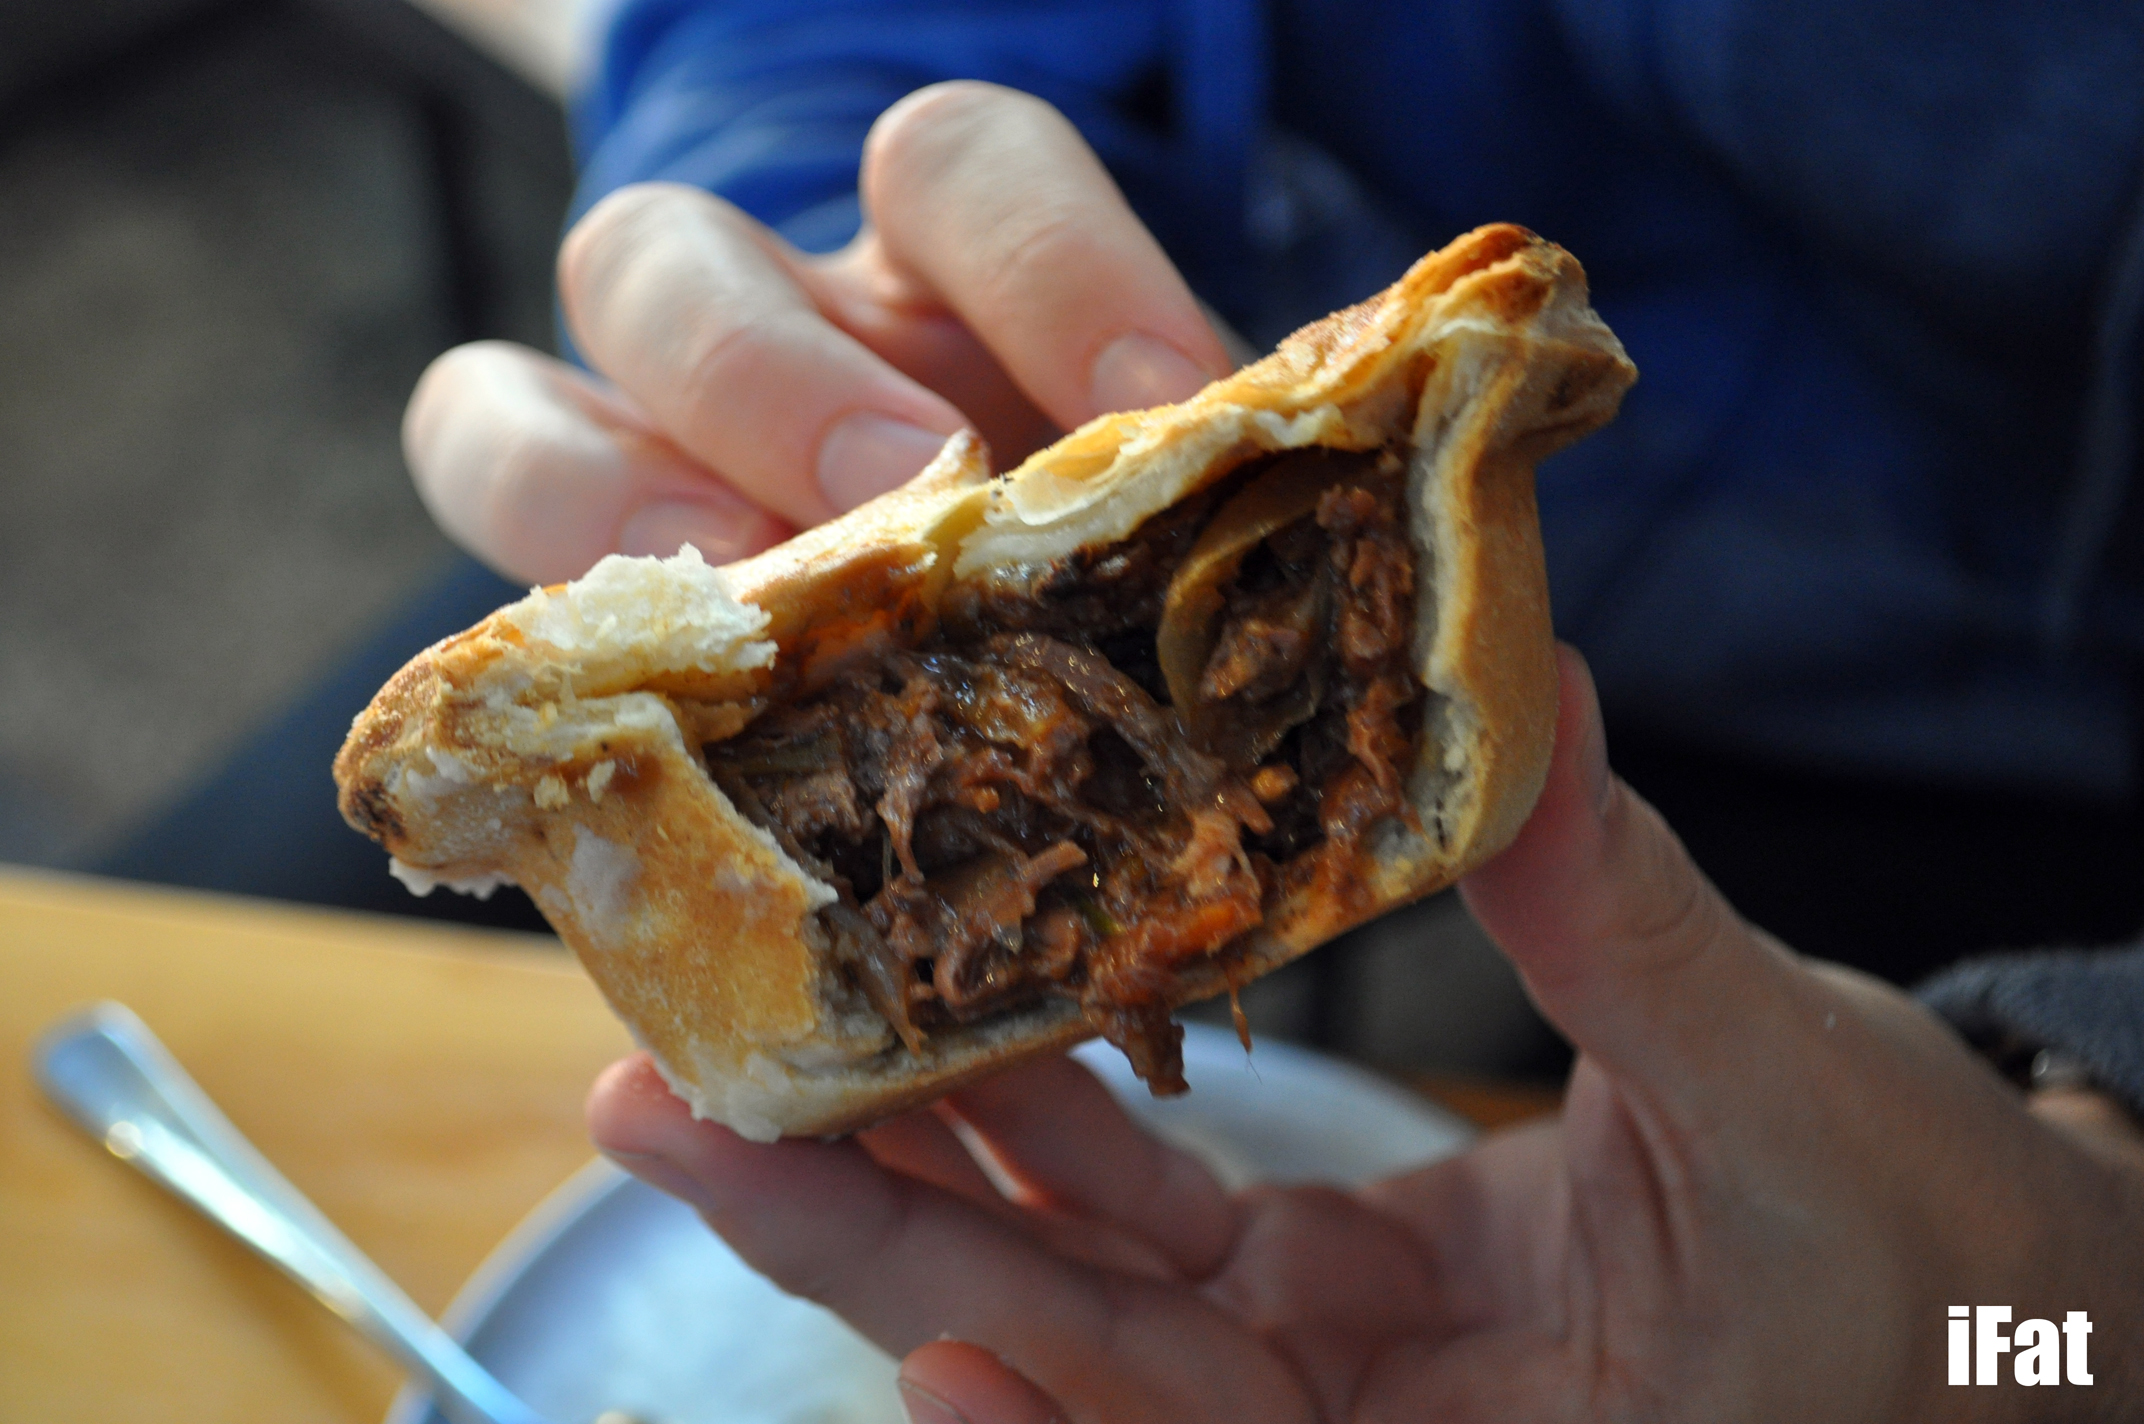 The Pie Tin, Newtown | iFat - Food Chronicles